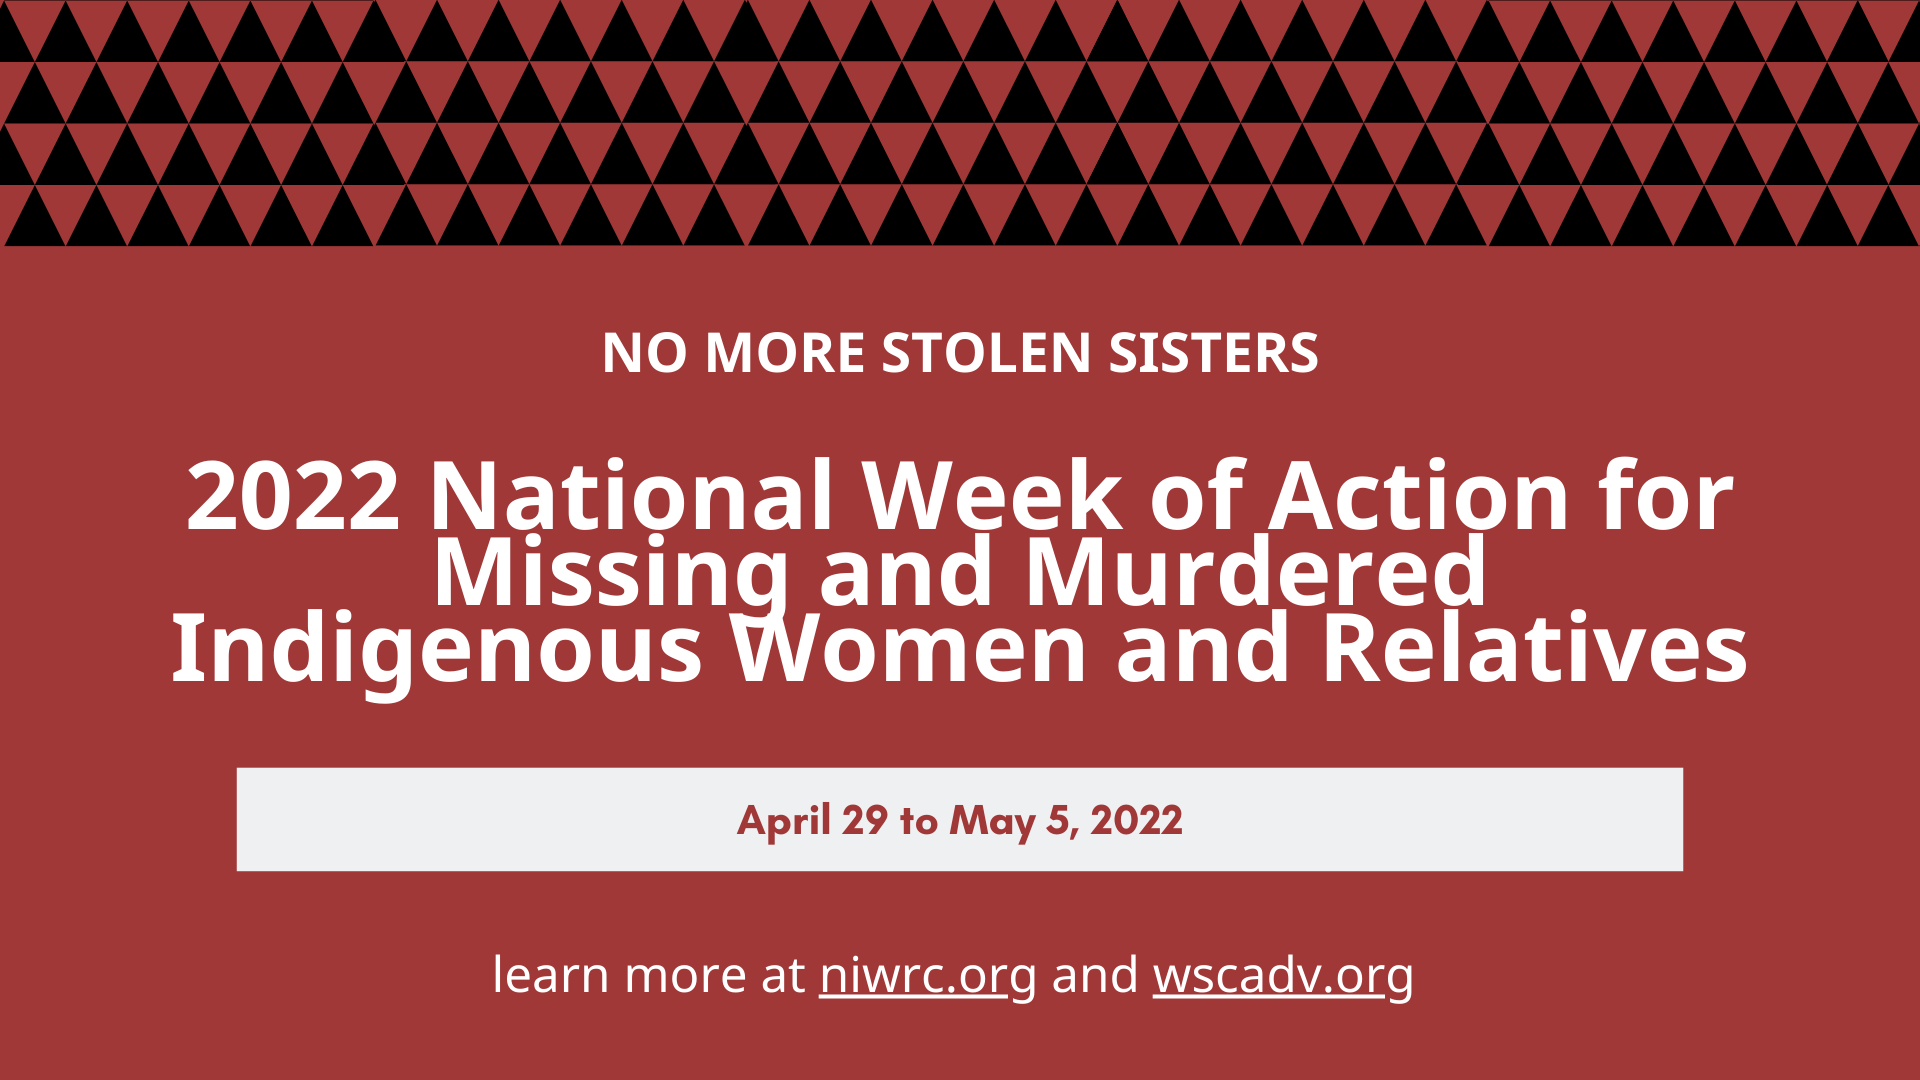 Red background with text that says 'No more stolen sisters, 2022 national week of action for Missing and Murdered Indigenous Women and Relatives, April 29-May 5, learn more at niwrc.org and wscadv.org